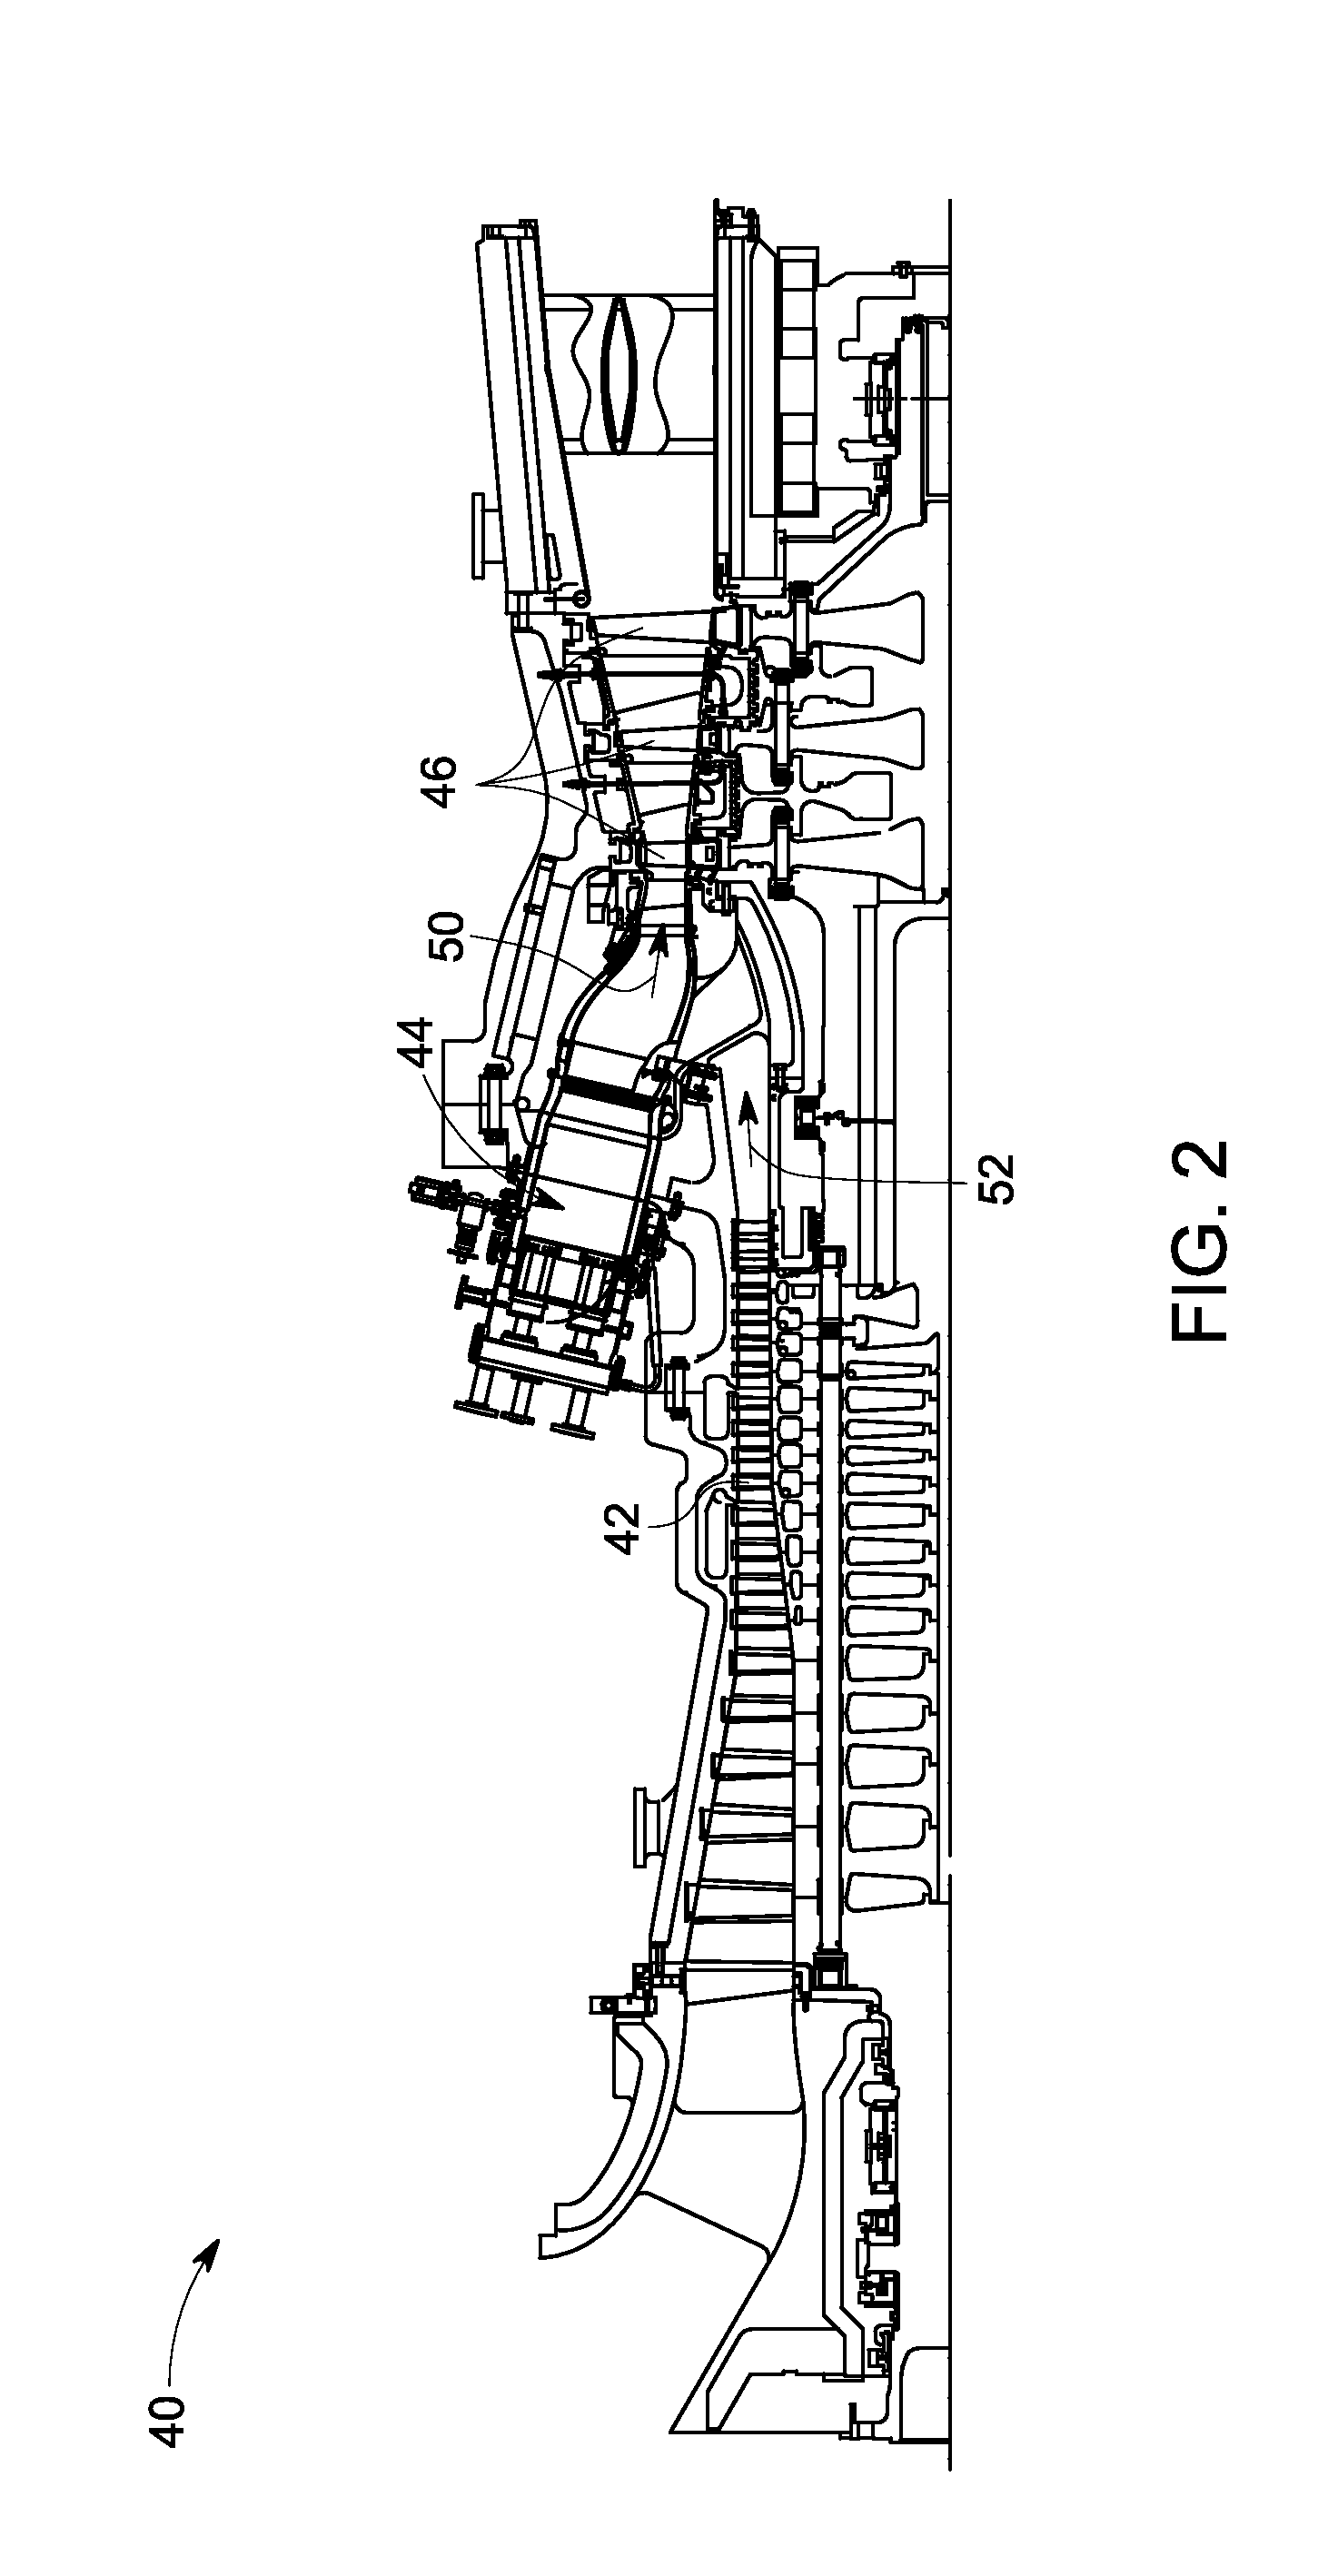 System and method to eliminate a hard rub and optimize a purge flow in a gas turbine